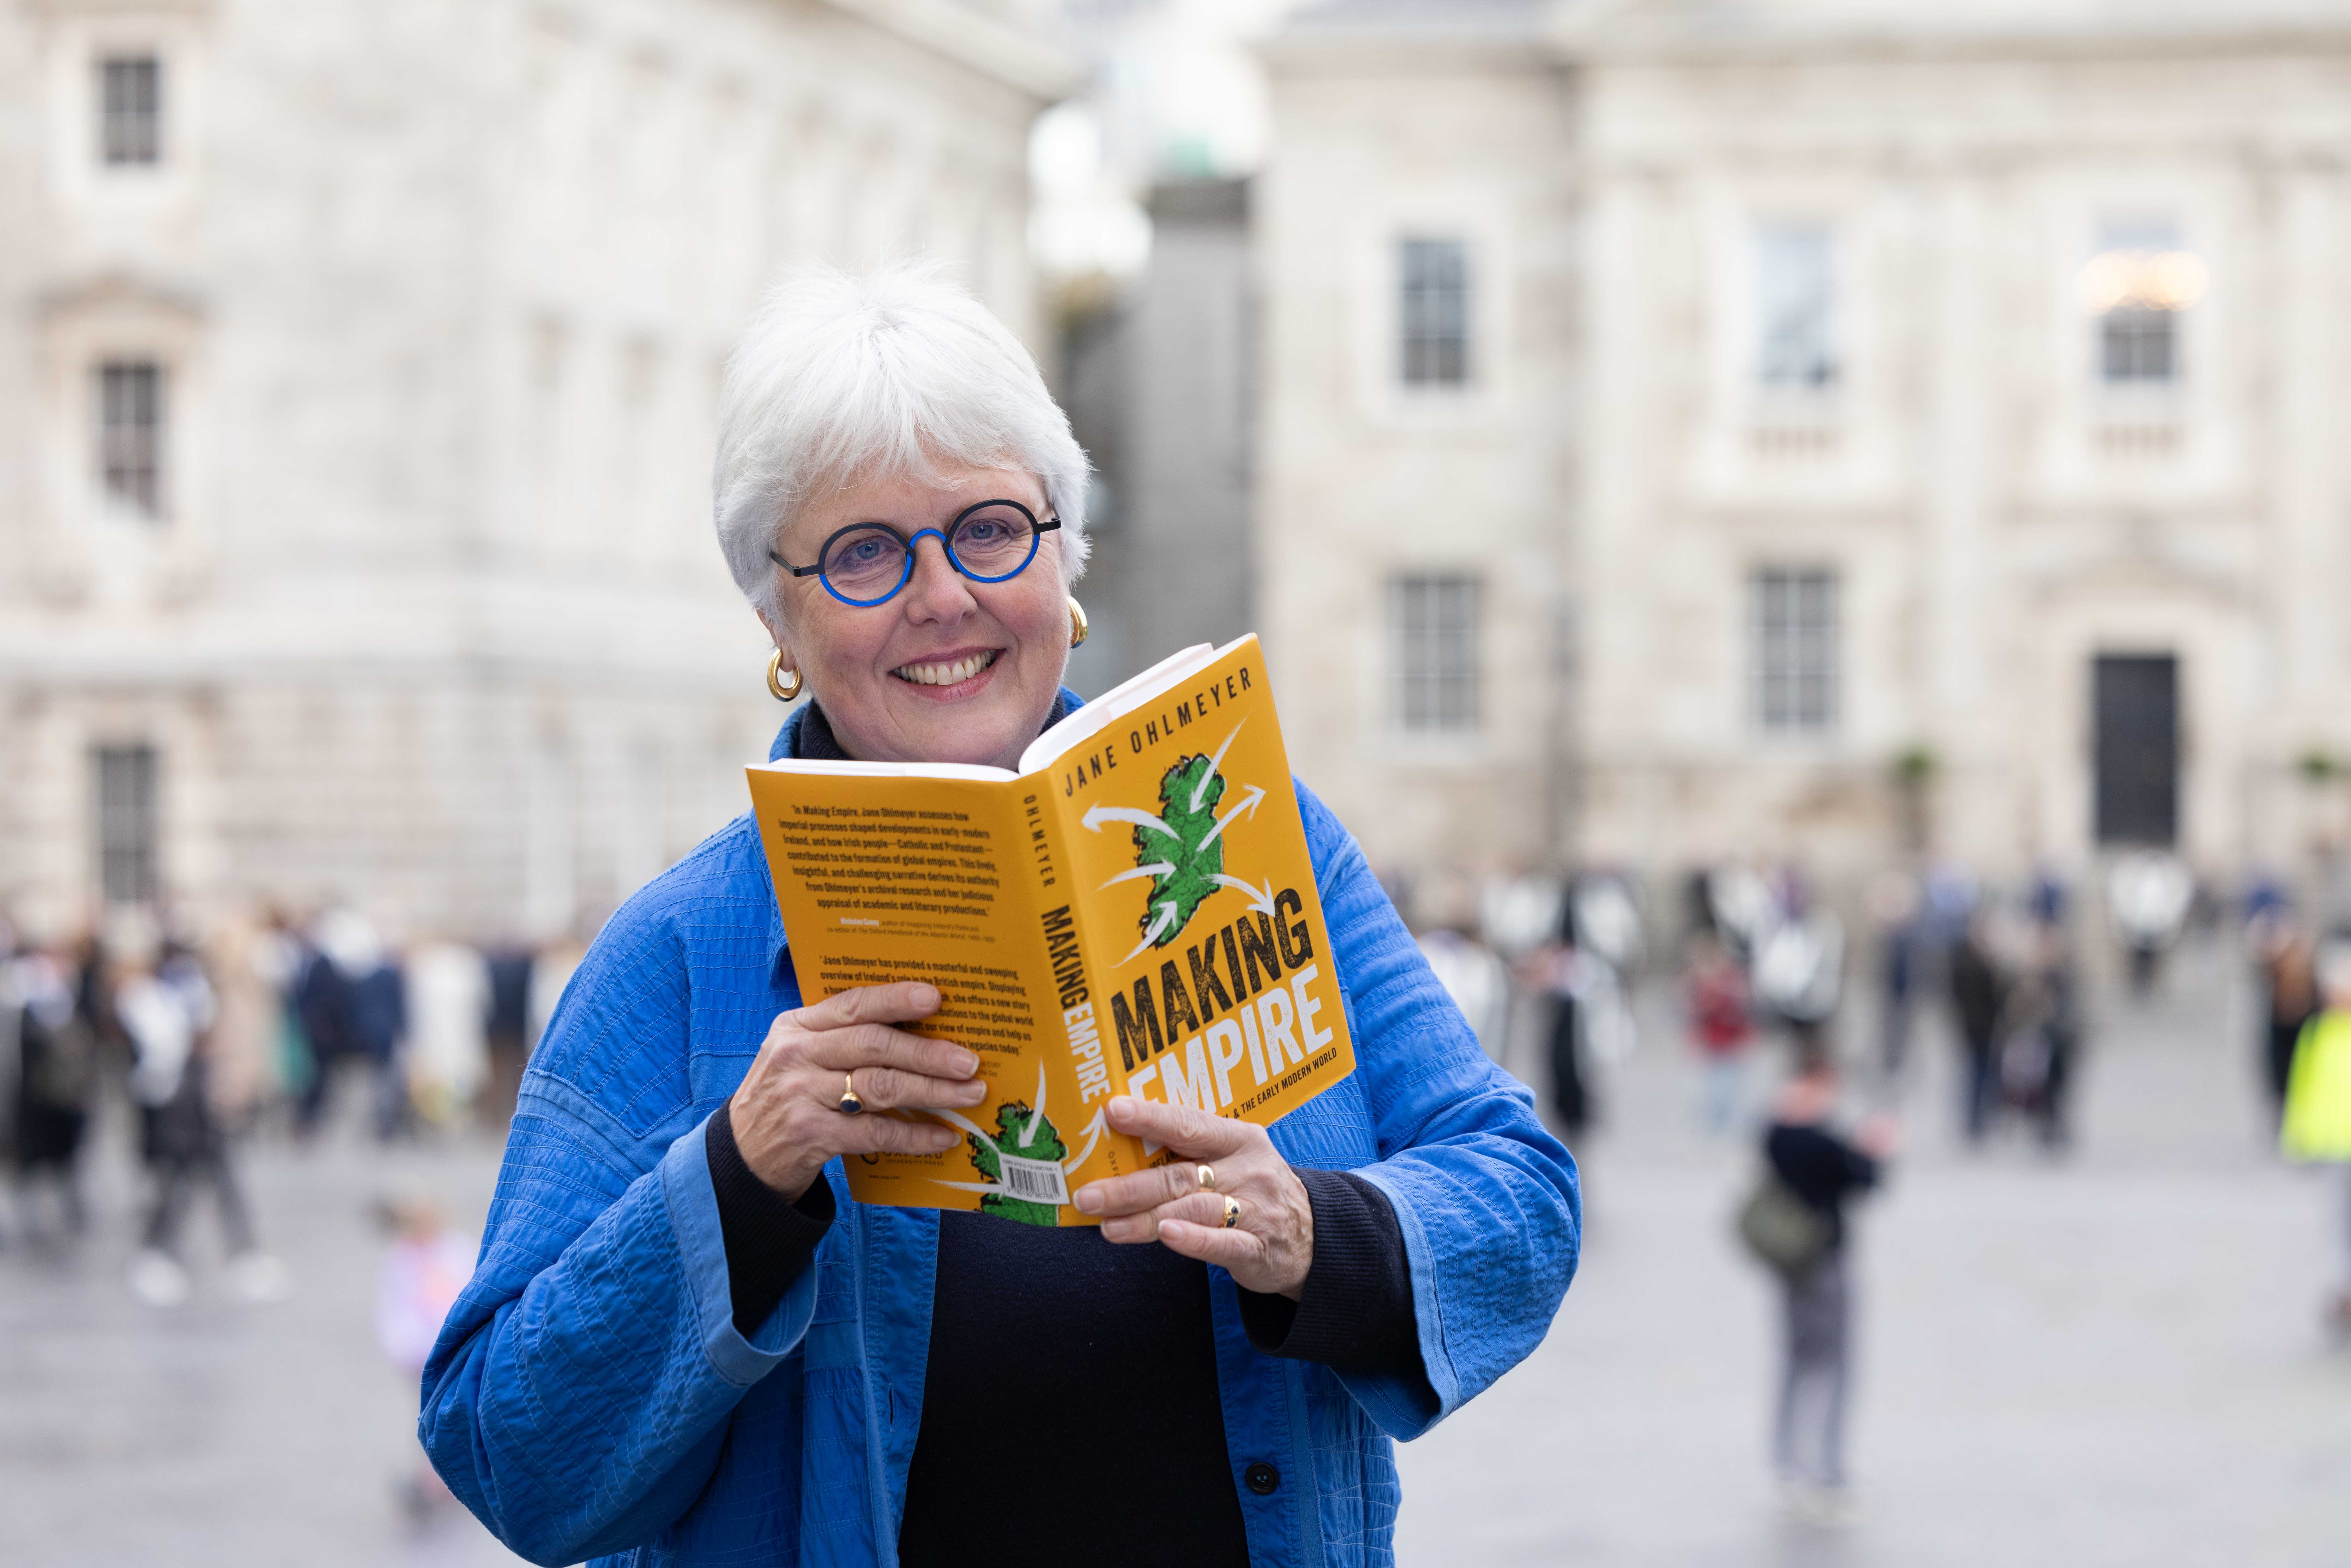 Portrait photo of Jane Ohlmeyer holding her book, 'Making Empire,' with classical buildings and people in the background